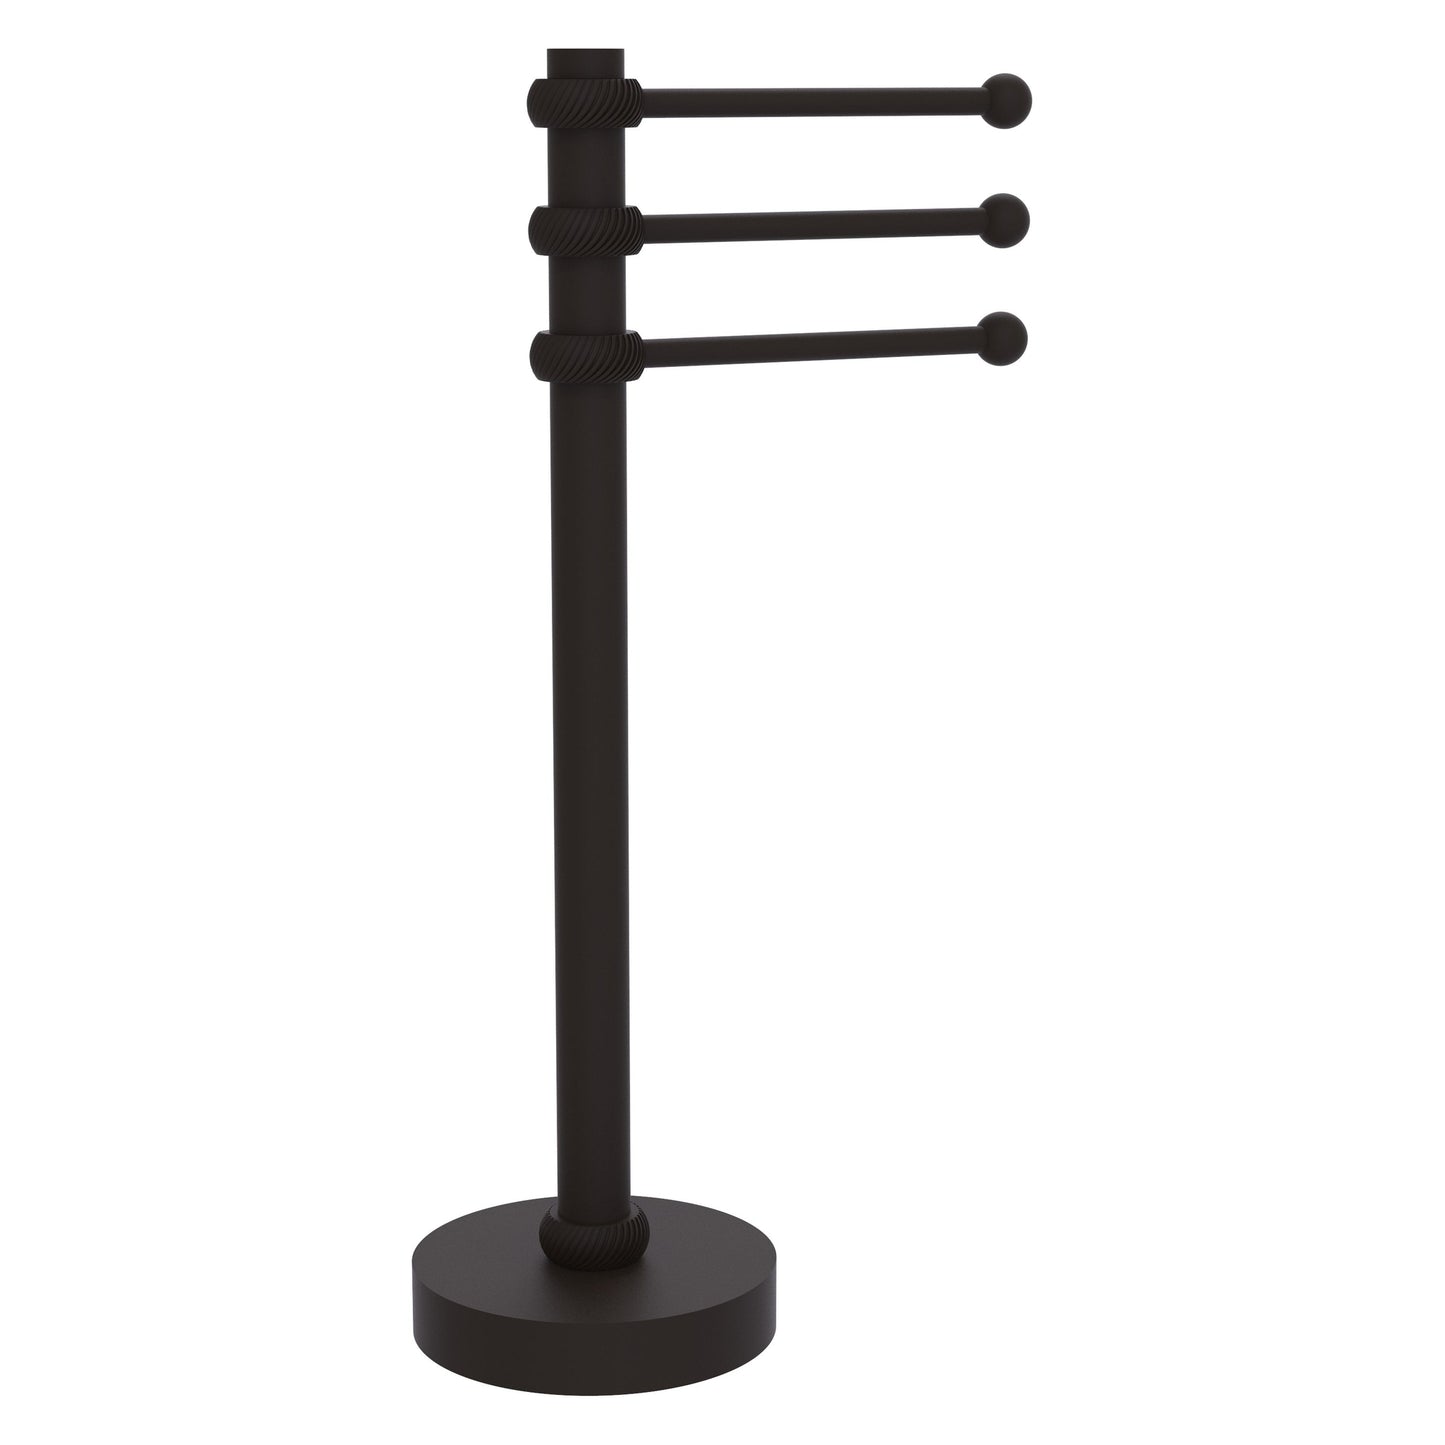 Allied Brass 973T 9" x 8" Oil Rubbed Bronze Solid Brass Vanity Top 3-Swing Arm Guest Towel Holder With Twisted Accents